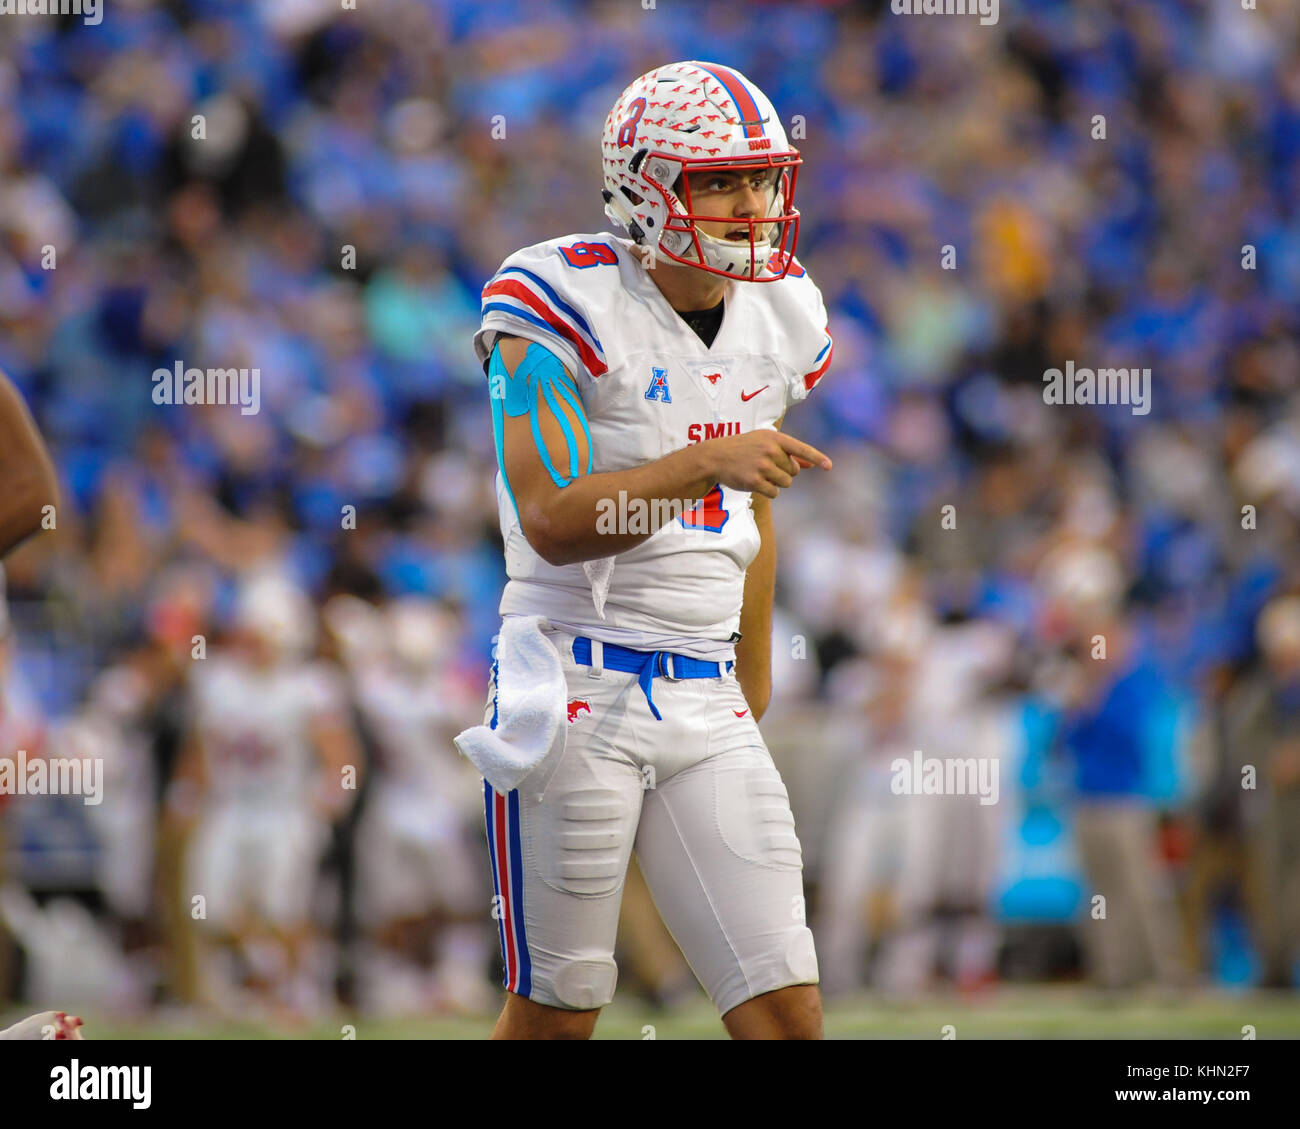 November 18, 2017; Memphis, TN, USA; SMU Mustangs QB, BEN HICKS (8), argues with the referee in NCAA D1 football action against the Memphis Tigers. The Memphis Tigers defeated the SMU Mustangs 66-45. Kevin Langley/CSM Stock Photo